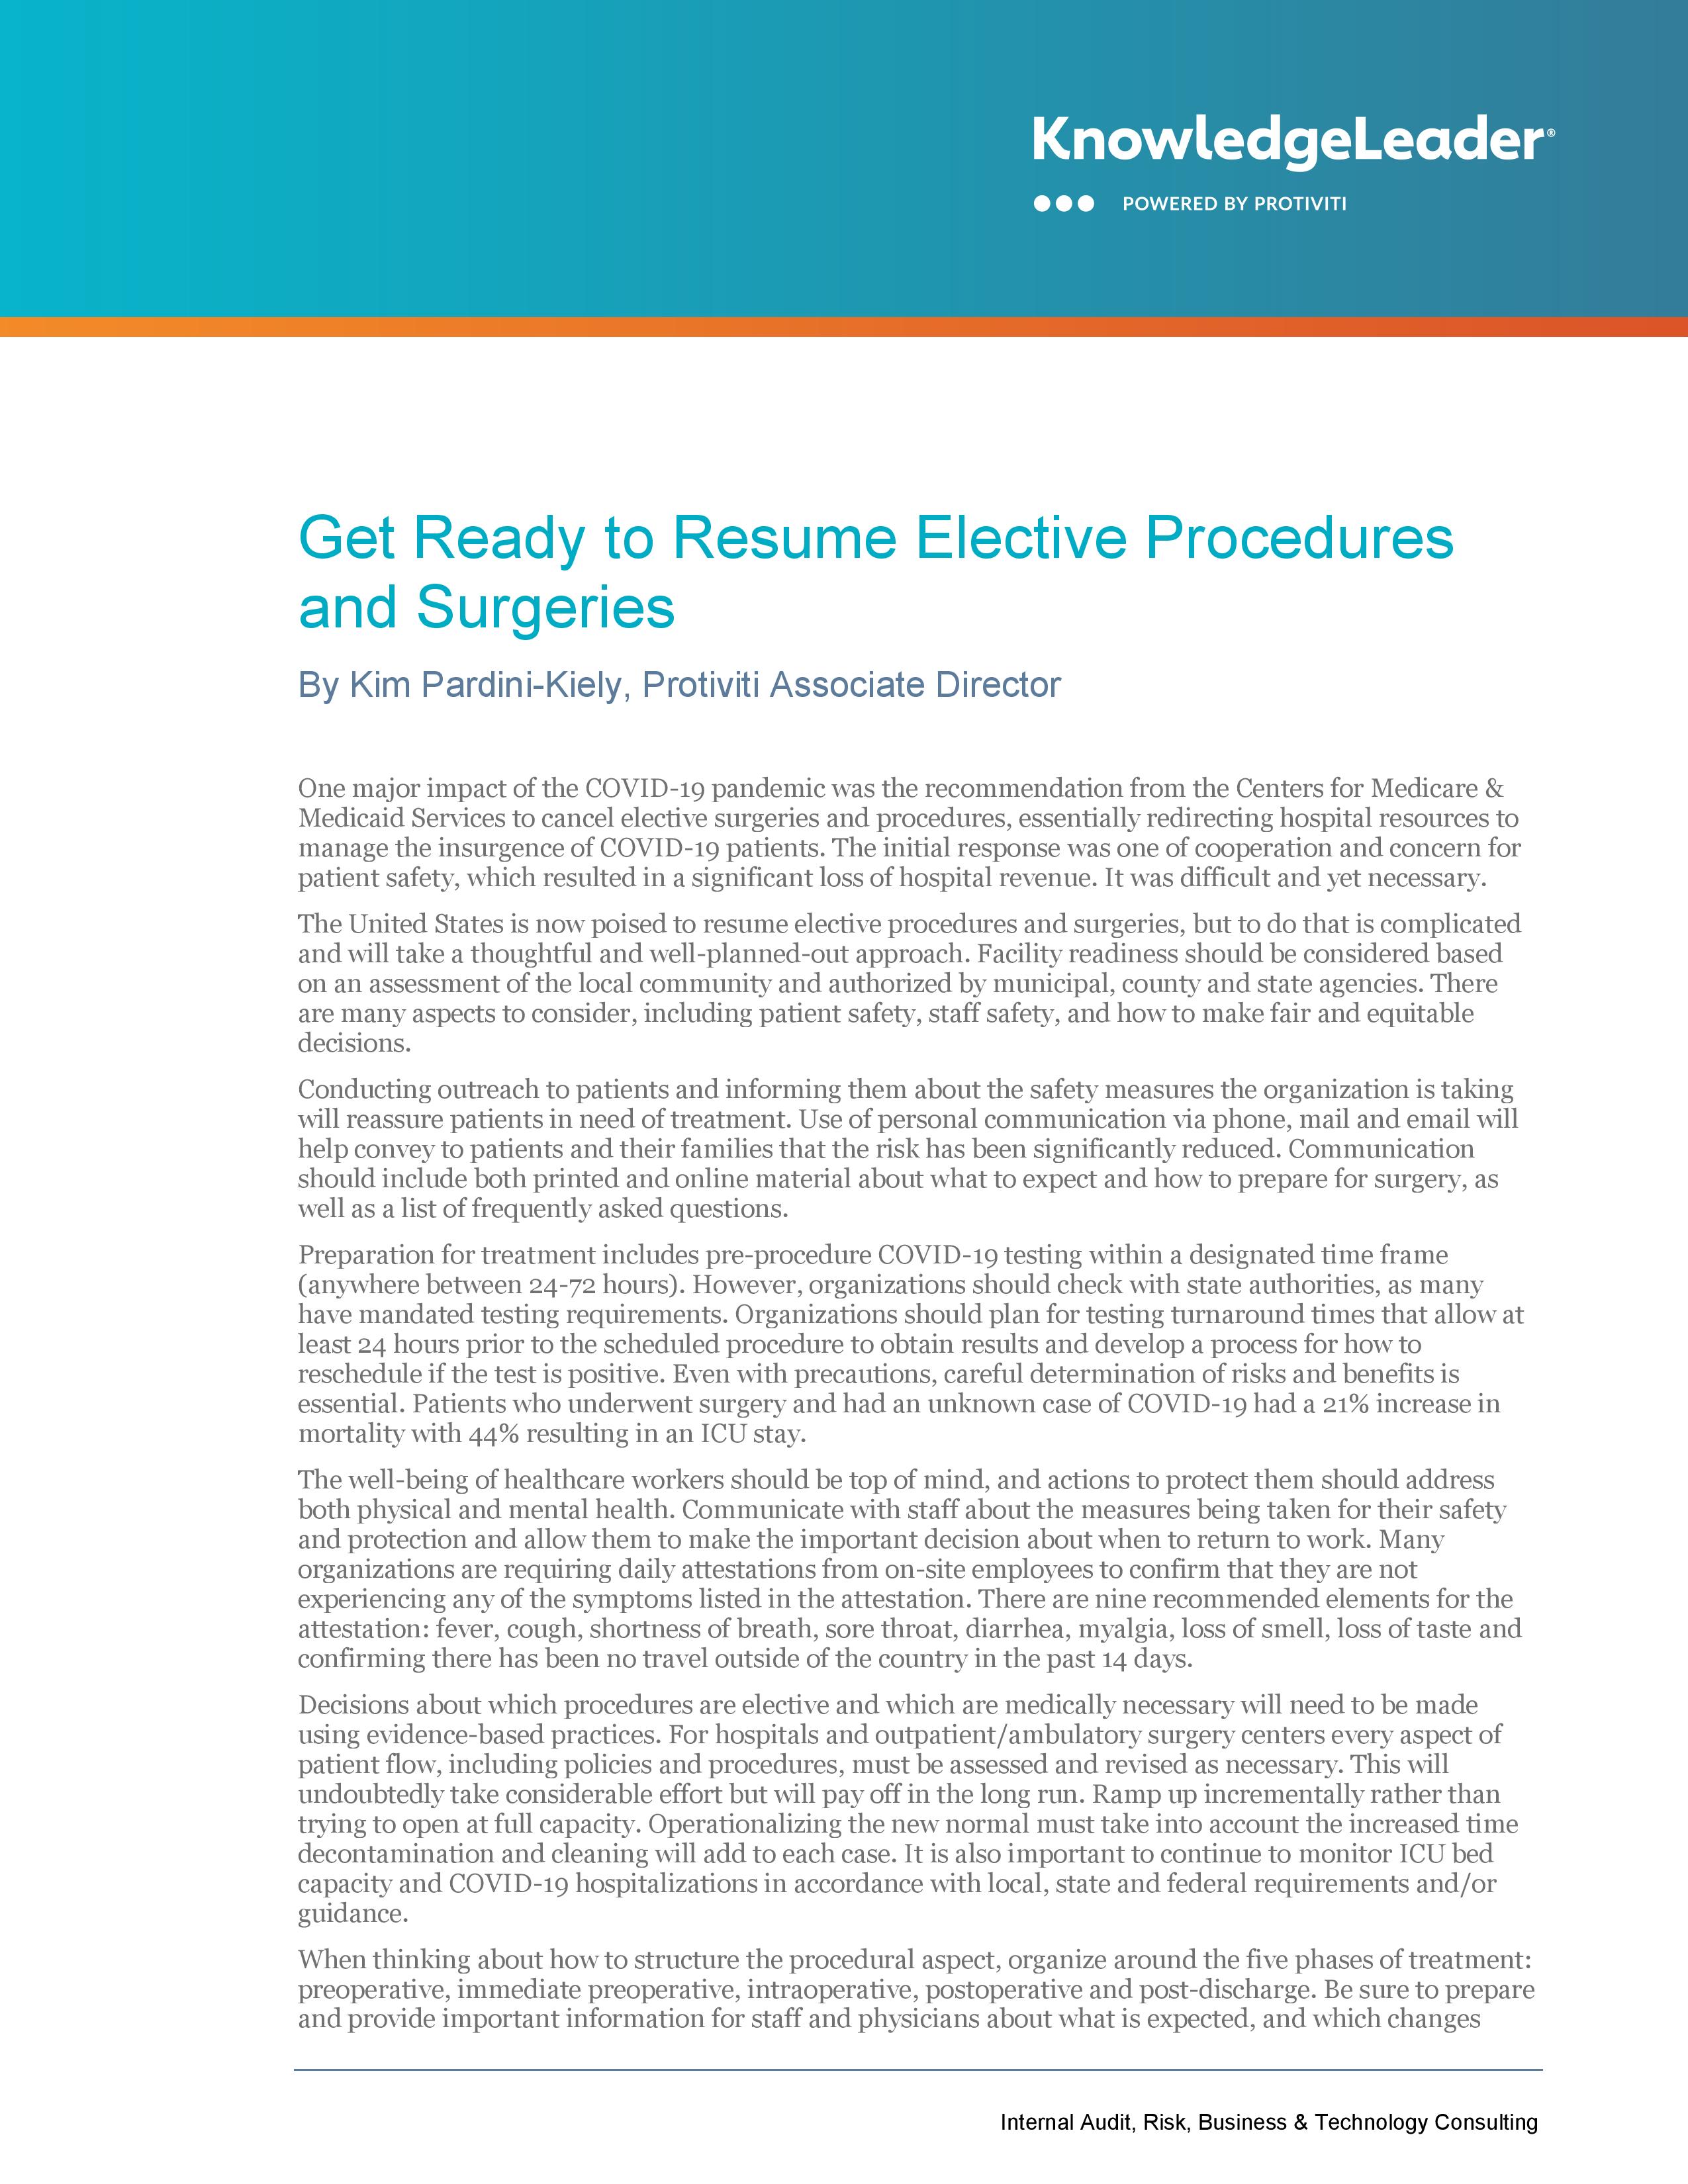 Screenshot of the first page of Get Ready to Resume Elective Procedures and Surgeries